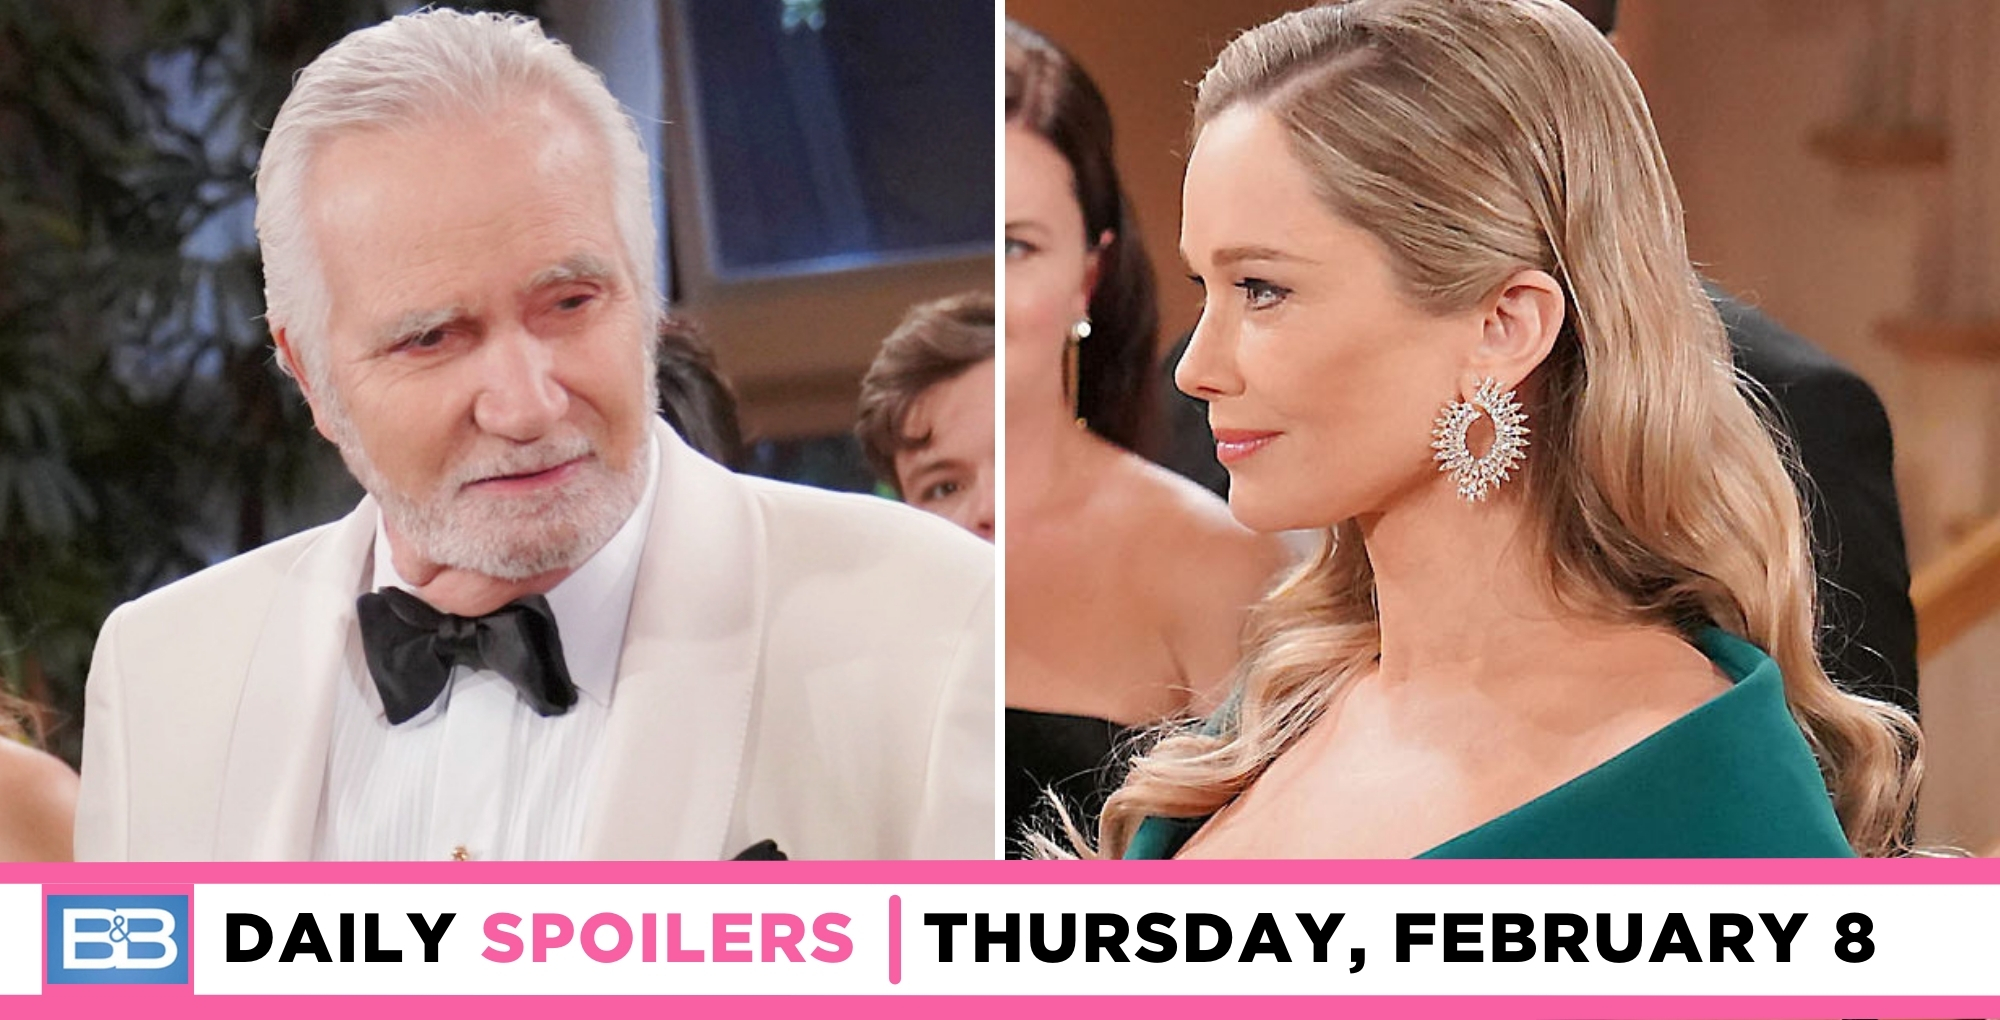 bold and the beautiful spoilers for thursday, february 8, episode 9205 feature eric forrester and donna logan.